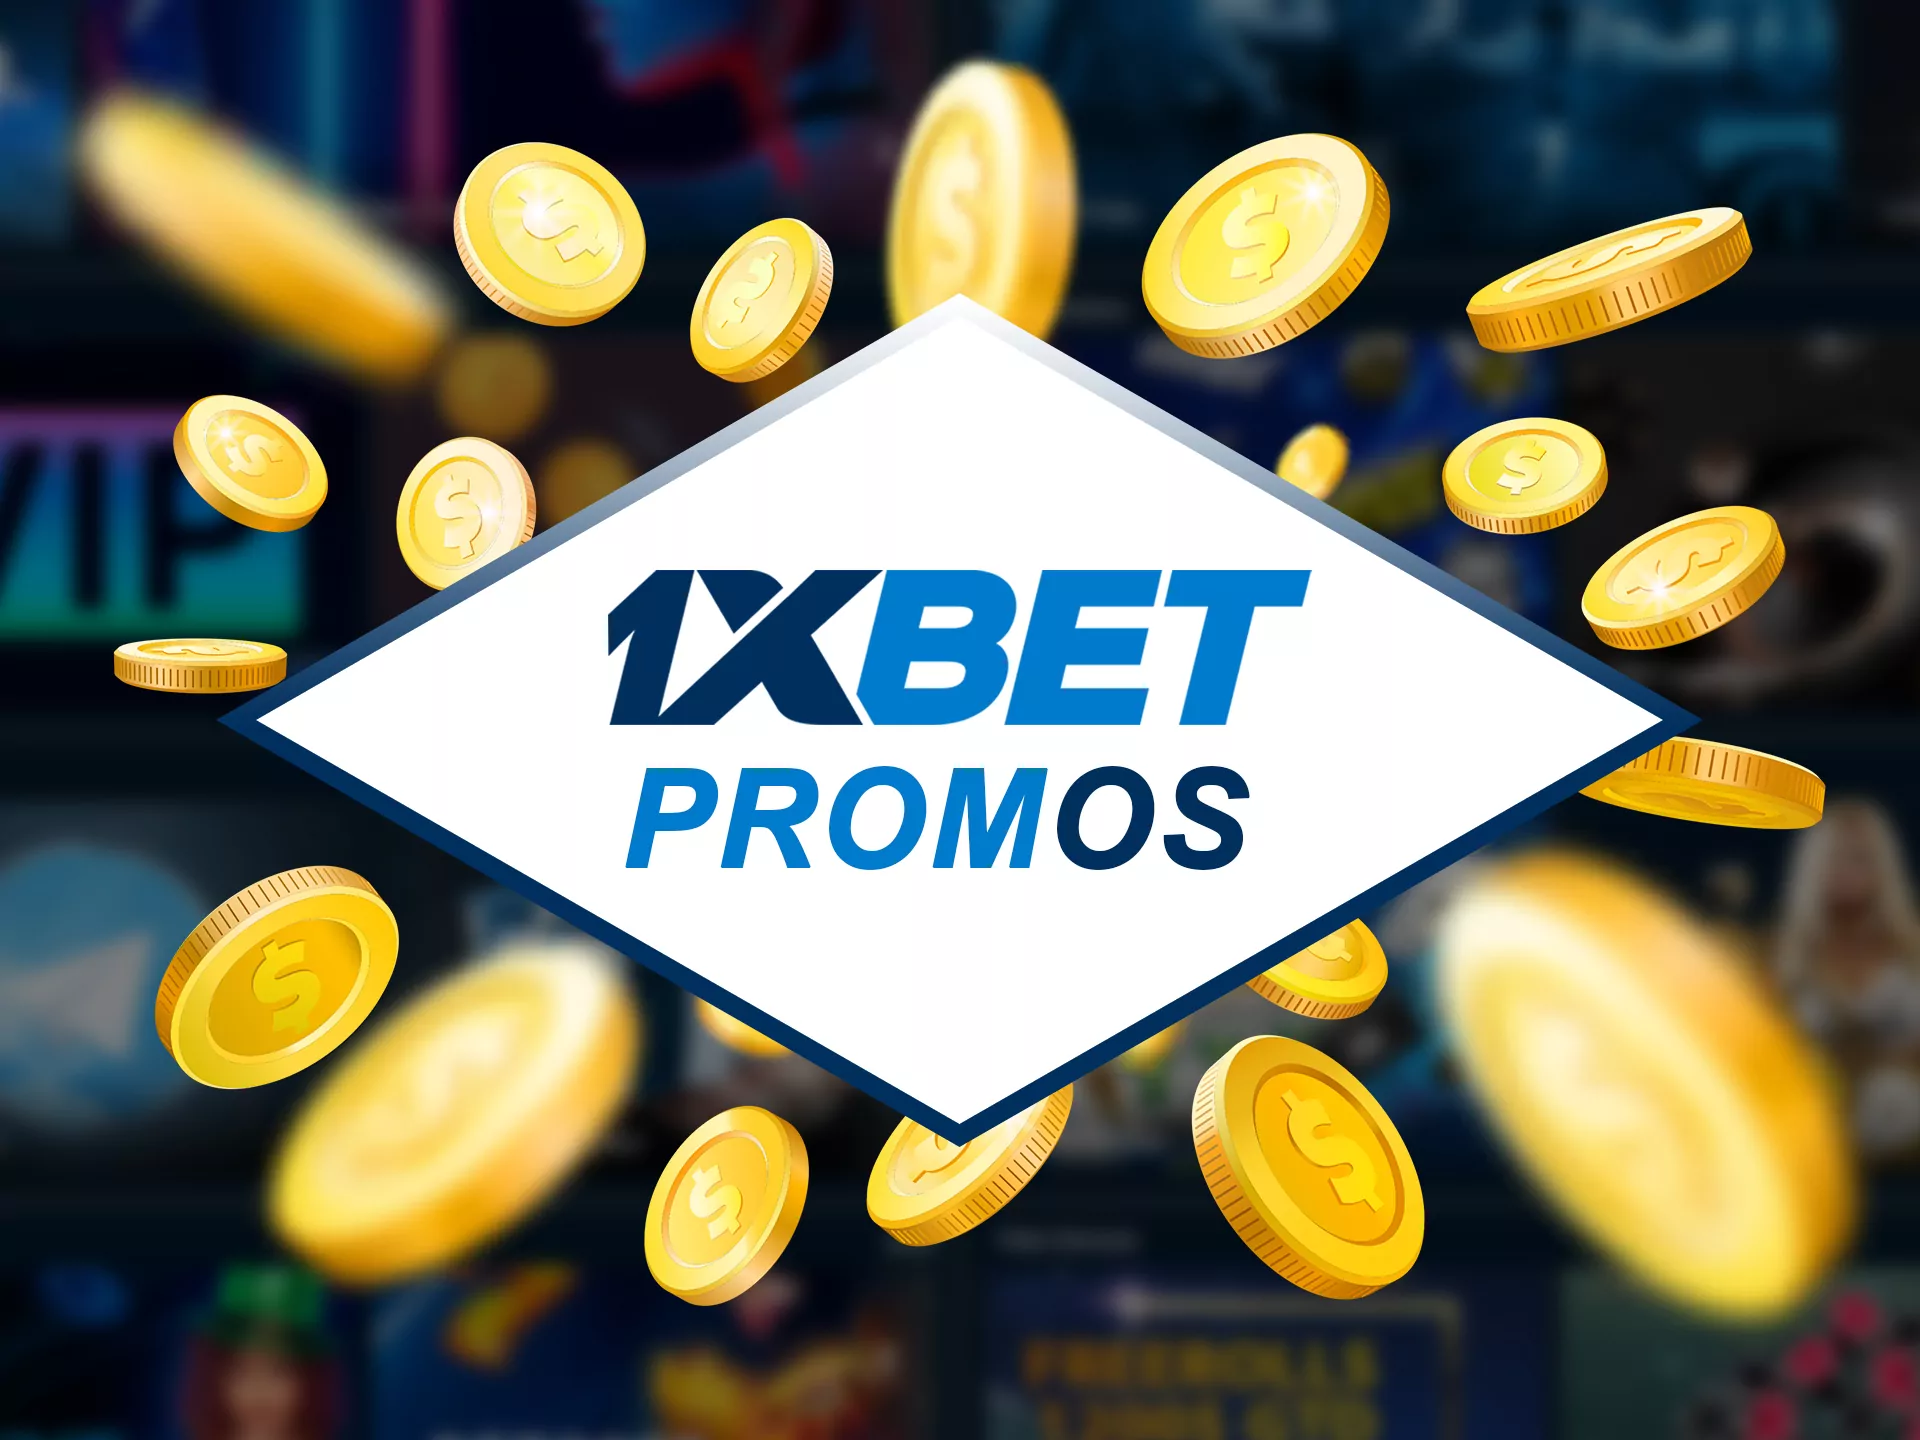 1xbet has various betting and casino promotions for you.